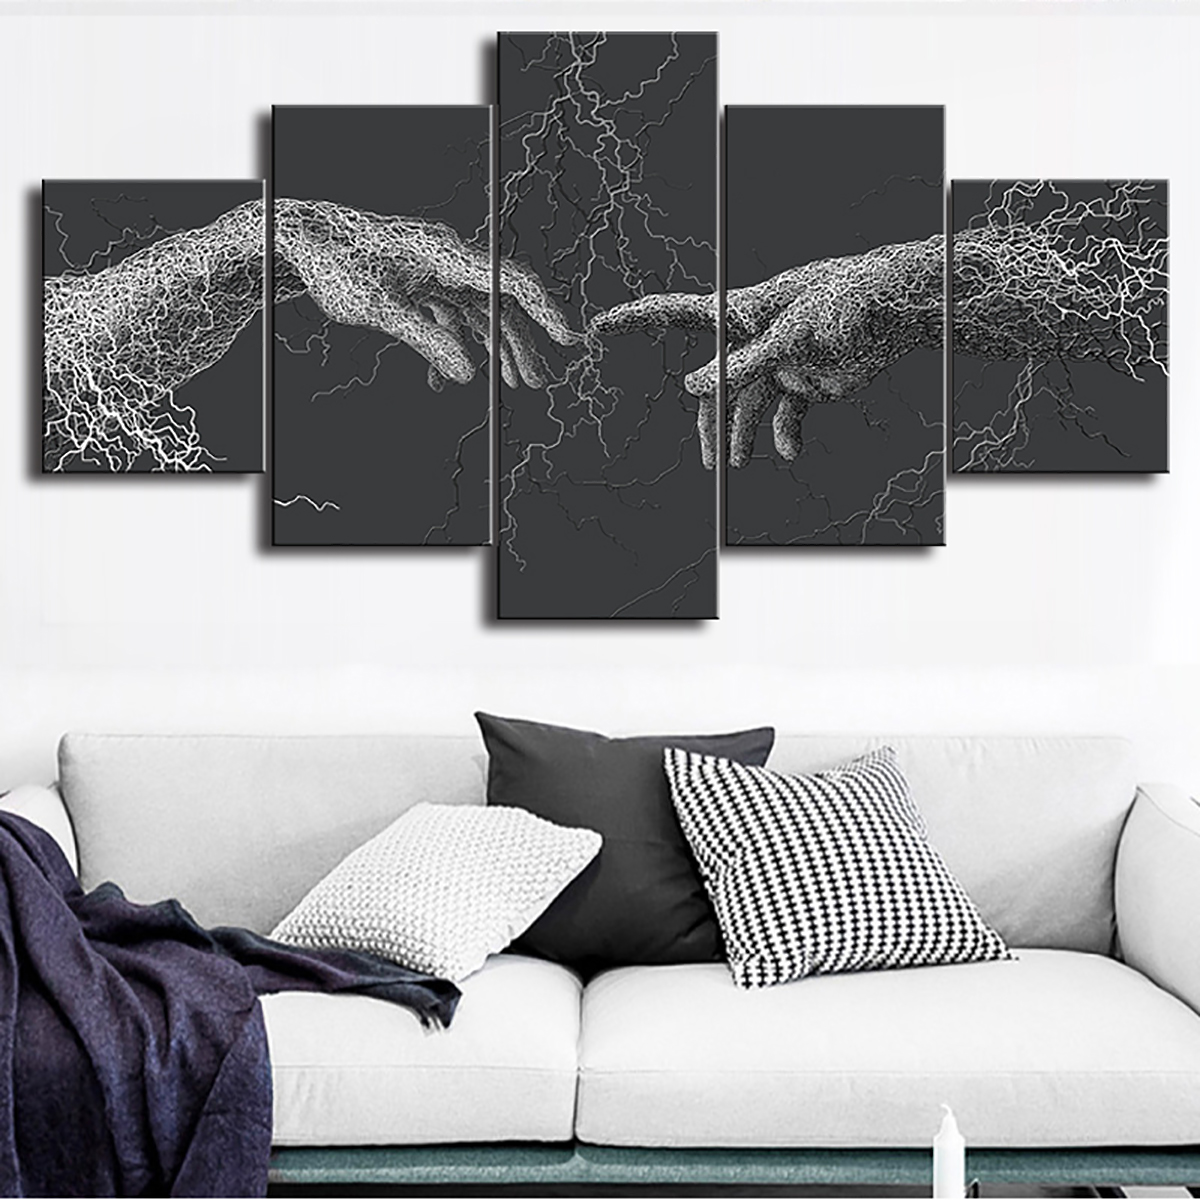 5Pcs-Canvas-Print-Paintings-Scenery-Oil-Painting-Wall-Decorative-Printing-Art-Picture-Frameless-Home-1758668-9